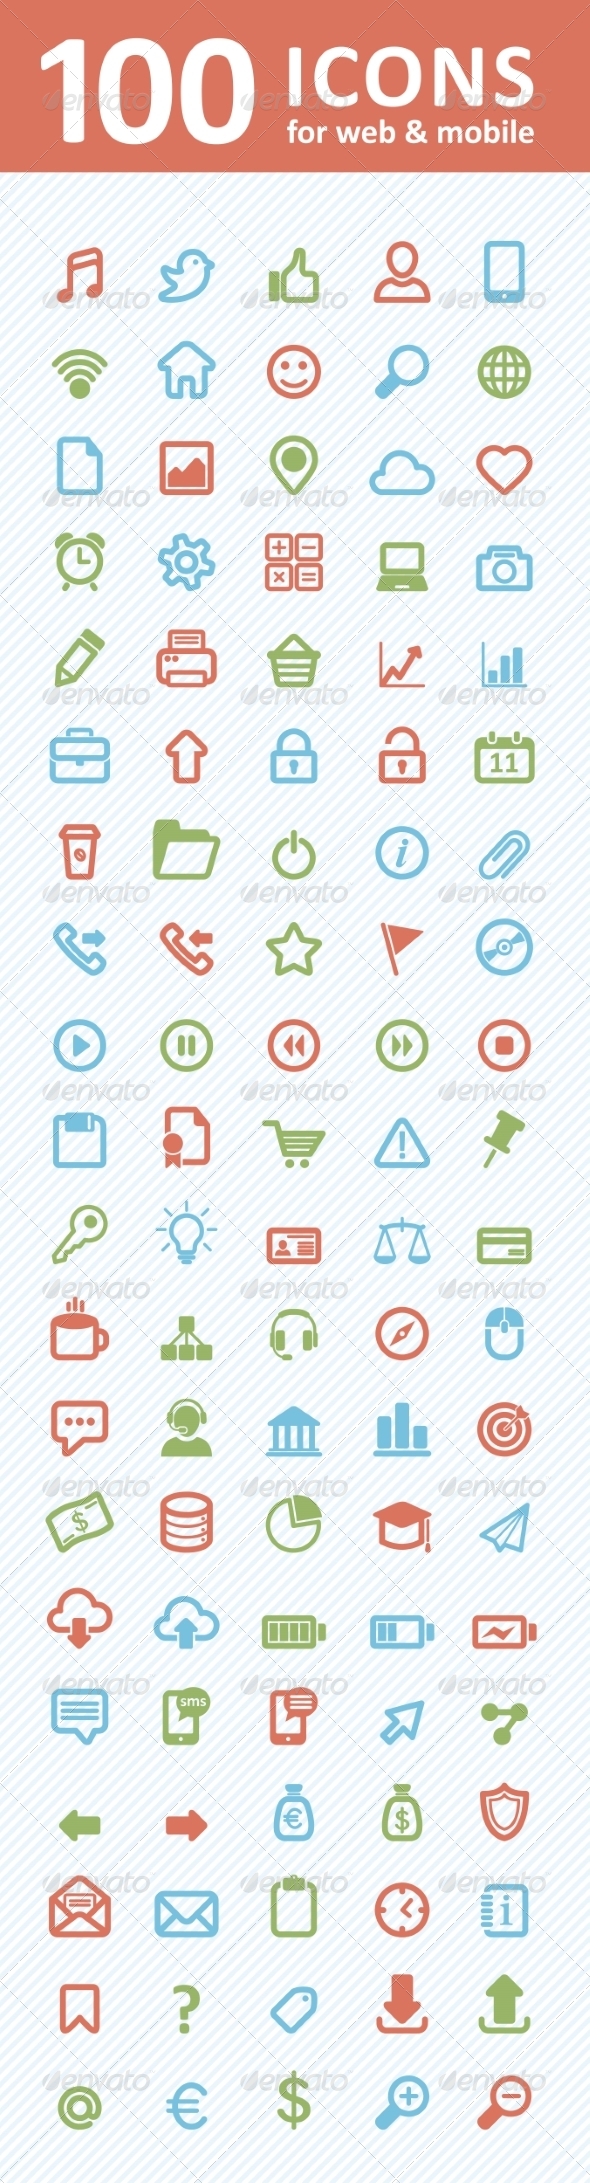 100 Icons for Web and Mobile